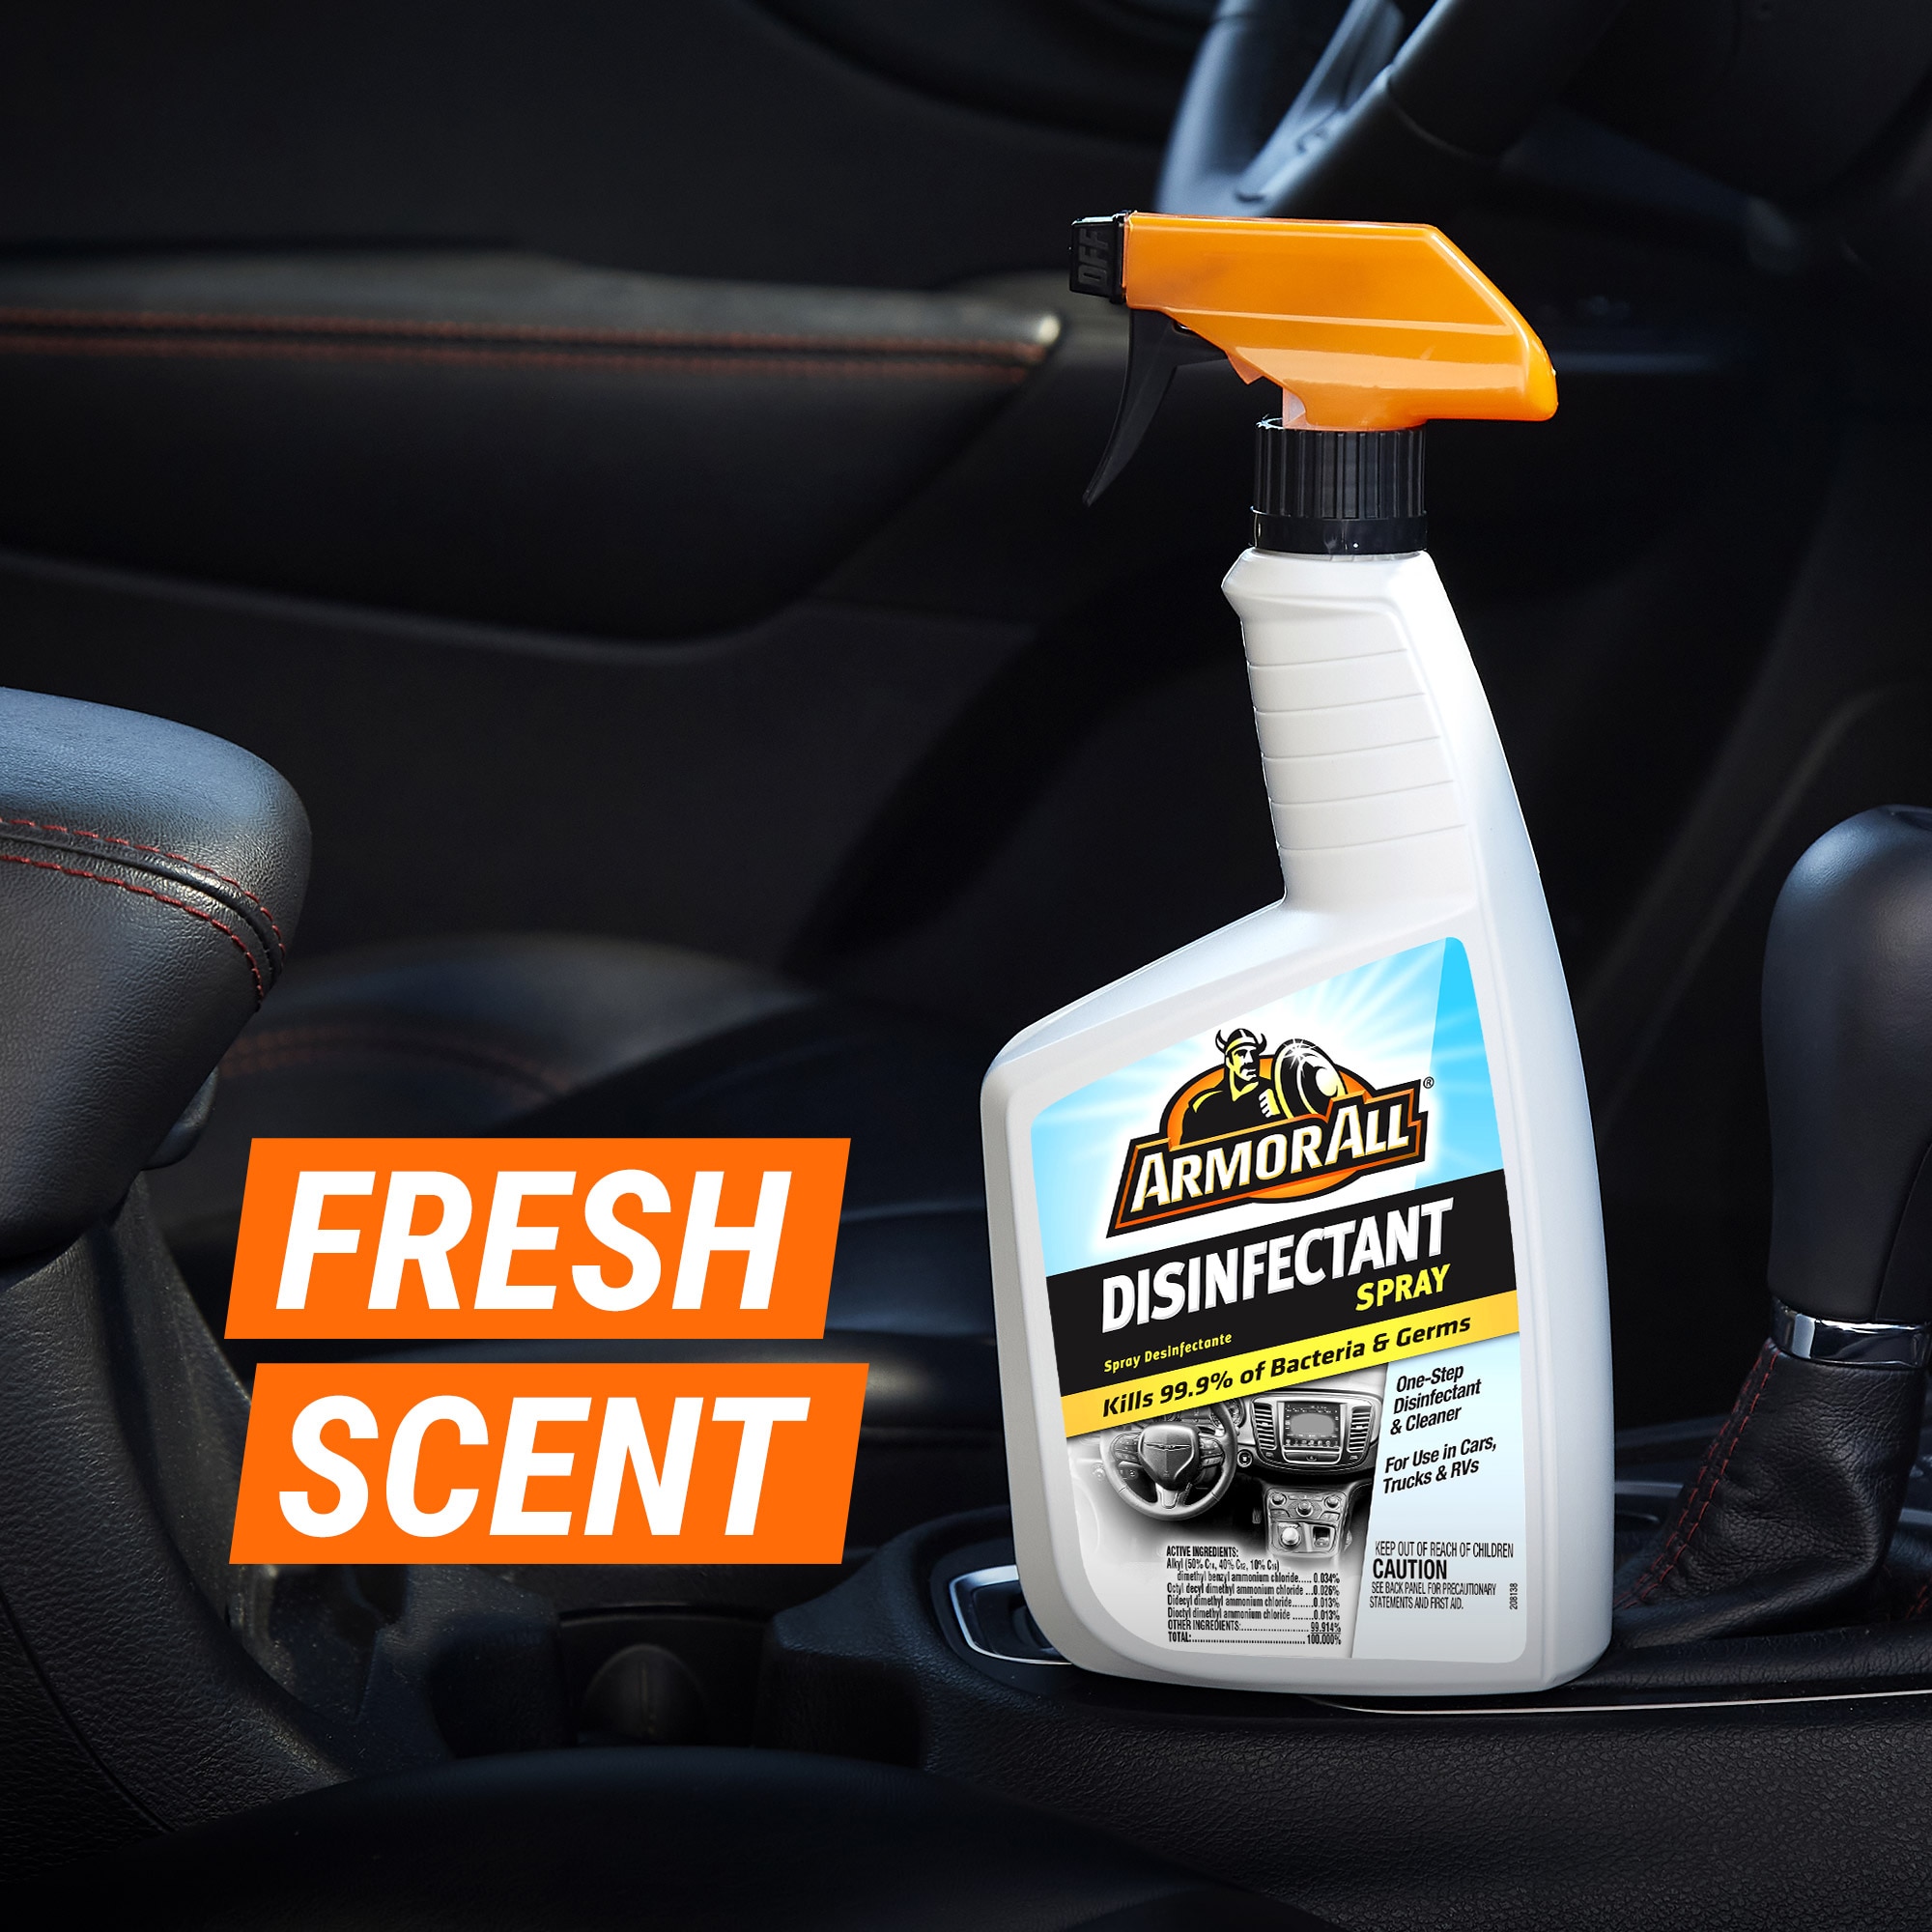 Meguiar's 15.2-fl oz Spray Car Interior Cleaner in the Car Interior  Cleaners department at